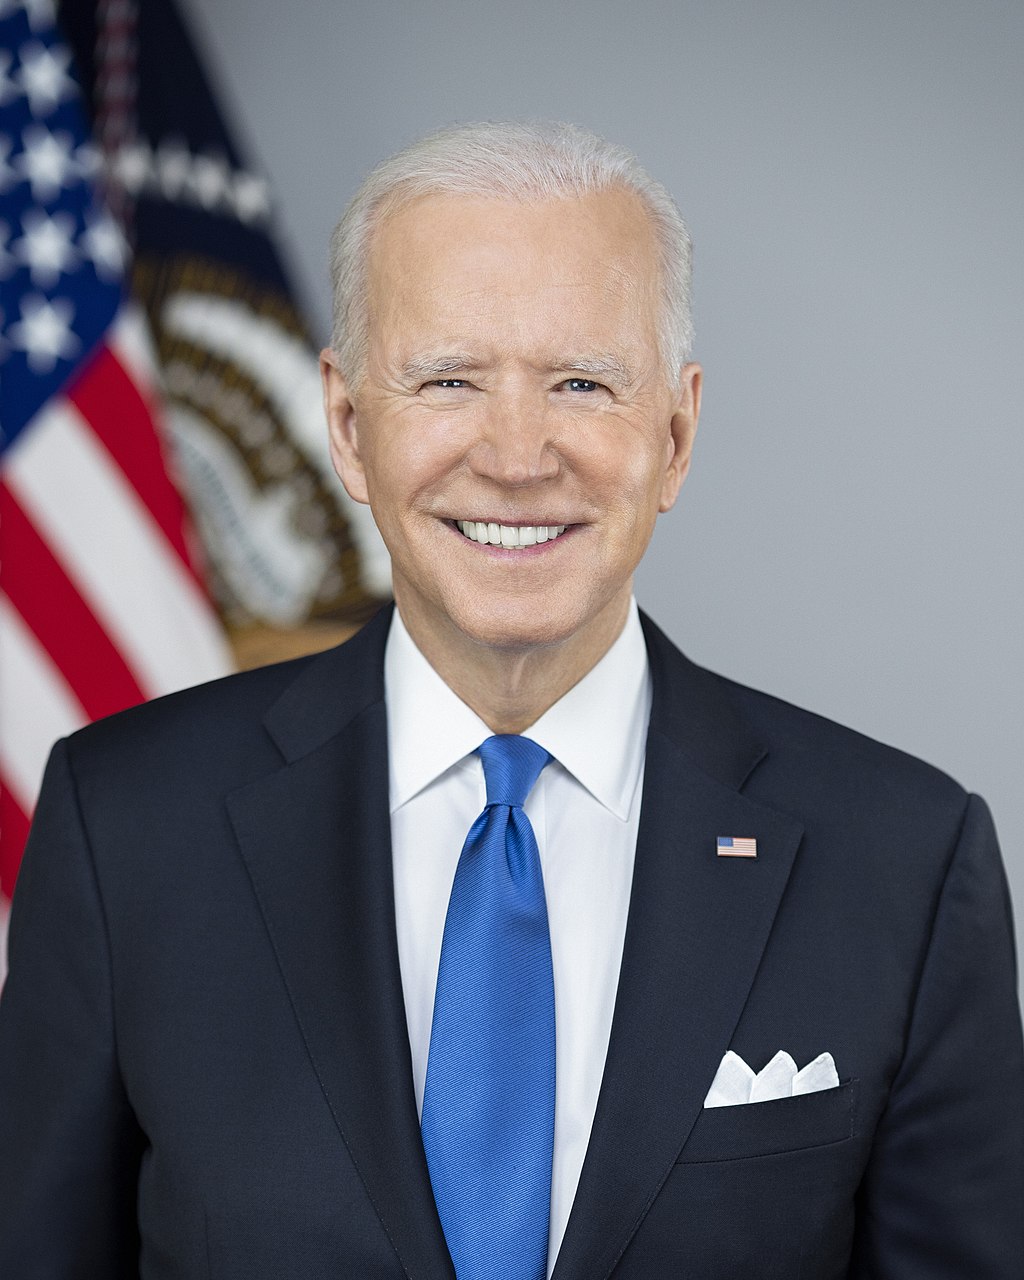 BIDEN “FIGHTS BACK” — full of sound and fury, signifying nothing 😬